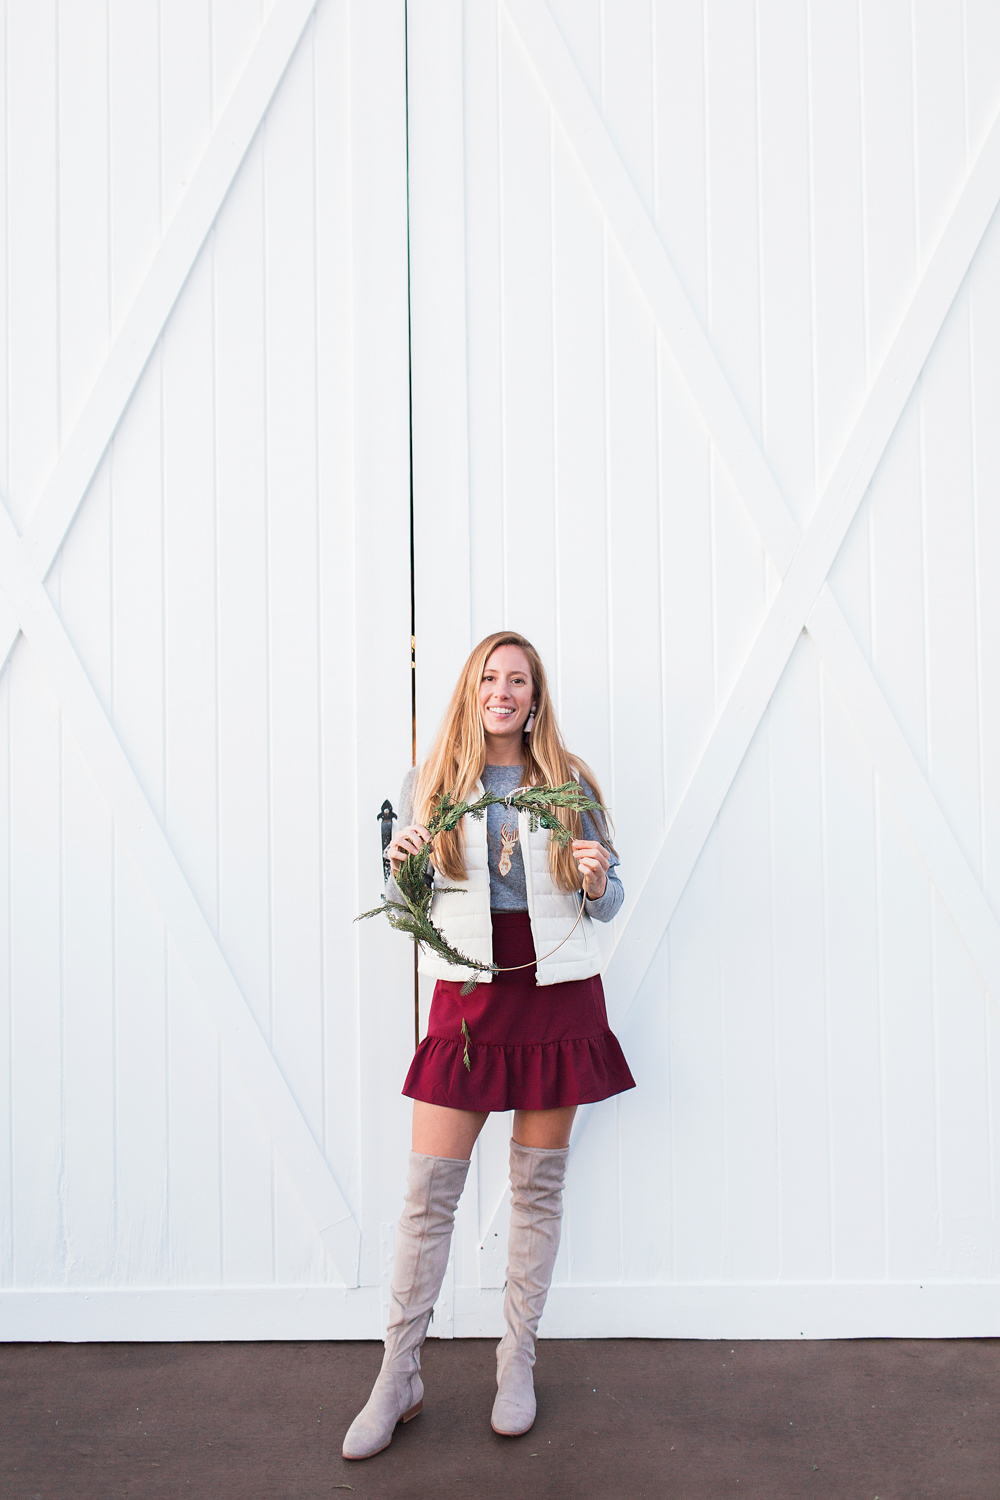 7 Winter Outfit Ideas for Warm Weather / Winter Outfit Inspiration / Burgundy Skirt / Grey Over the Knee Boots 